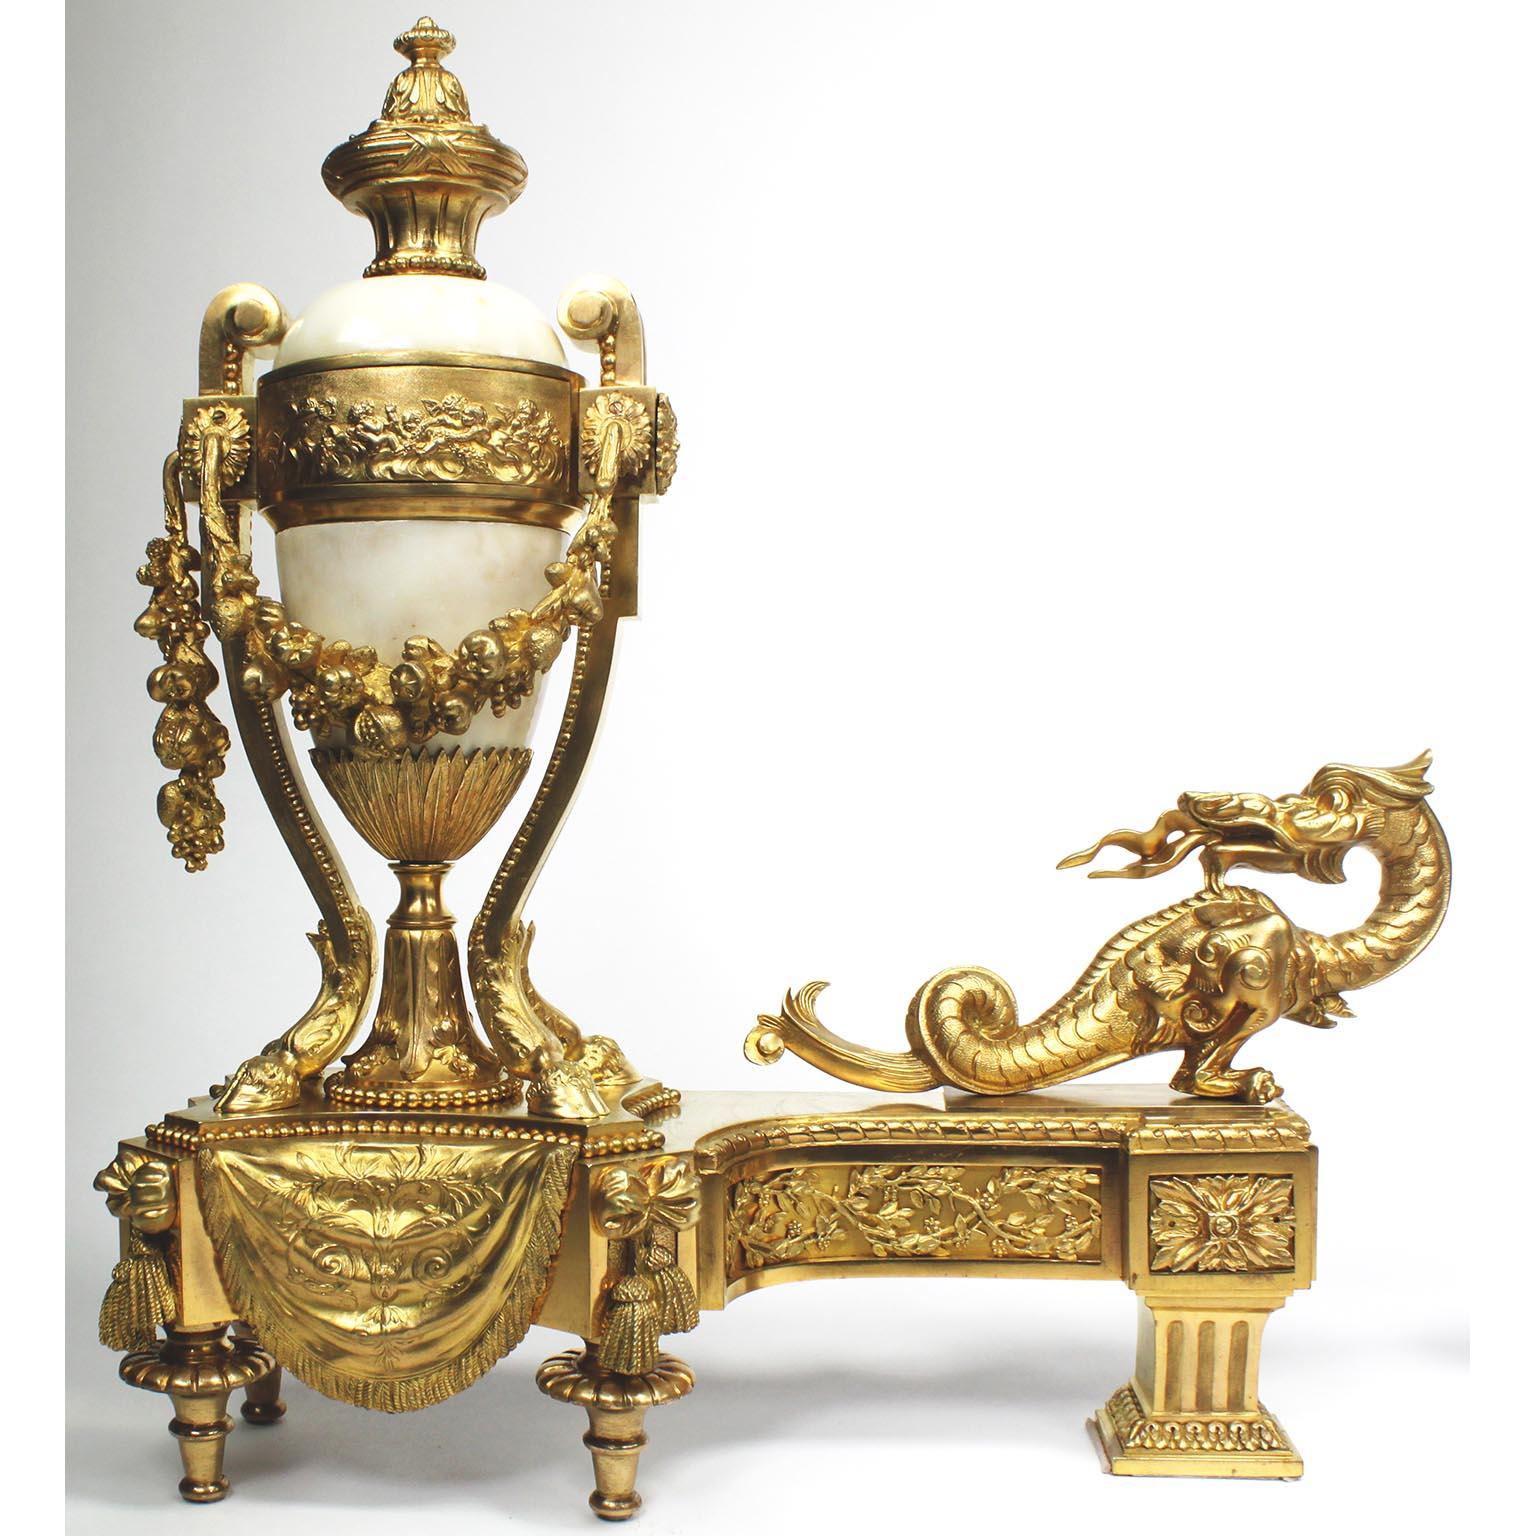 A fine pair of French 19th century Japonisme Louis XV style Gilt-Bronze and Marble Figural Chenets (Andirons) by BOUHON FRES, each depicting a flaming dragon atop an 